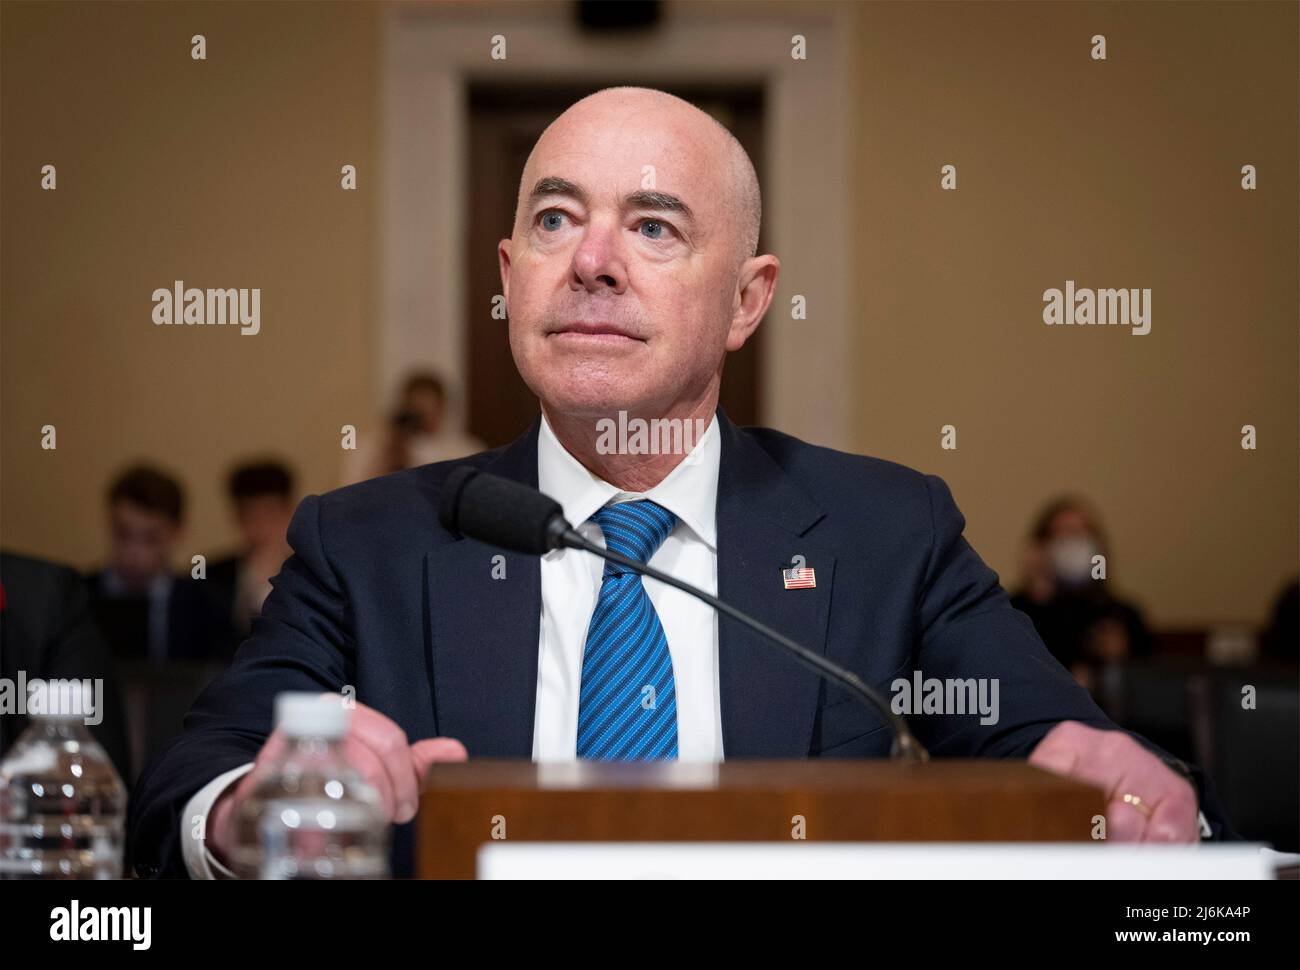 Washington, United States of America. 27 April, 2022. U.S Homeland Security Secretary Alejandro Mayorkas responds to a question during testimony at the House Committee on Appropriations, on Capitol Hill April 28, 2022 in Washington, D.C.  Credit: Benjamin Applebaum/DHS Photo/Alamy Live News Stock Photo